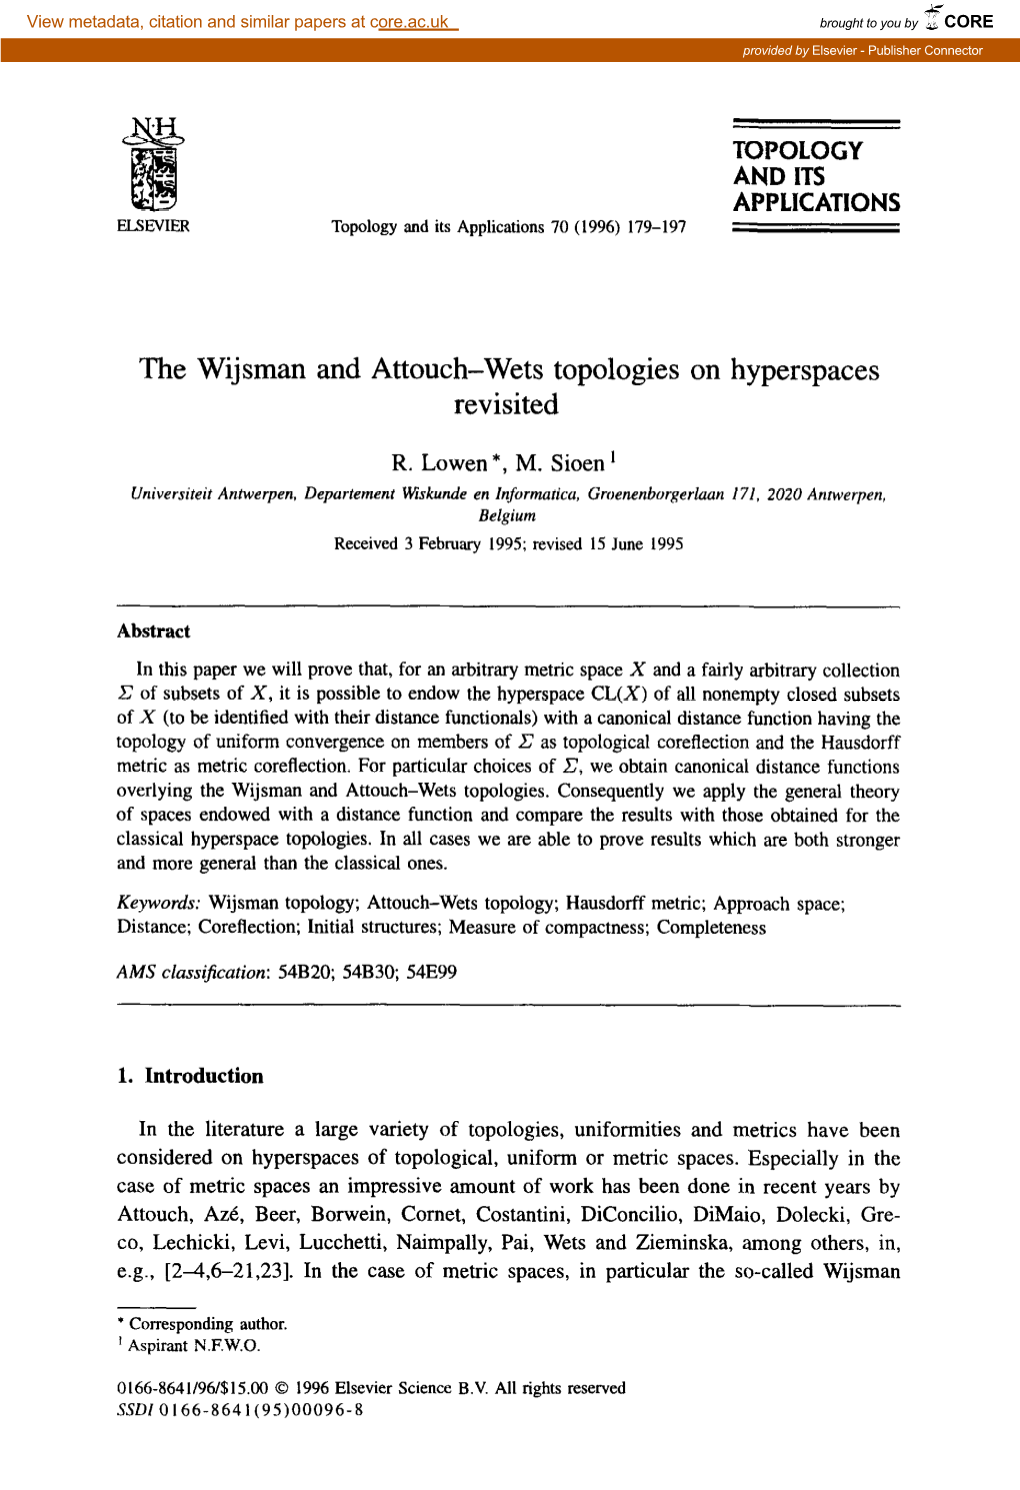 The Wijsman and Attouch-Wets Topologies on Hyperspaces Revisited